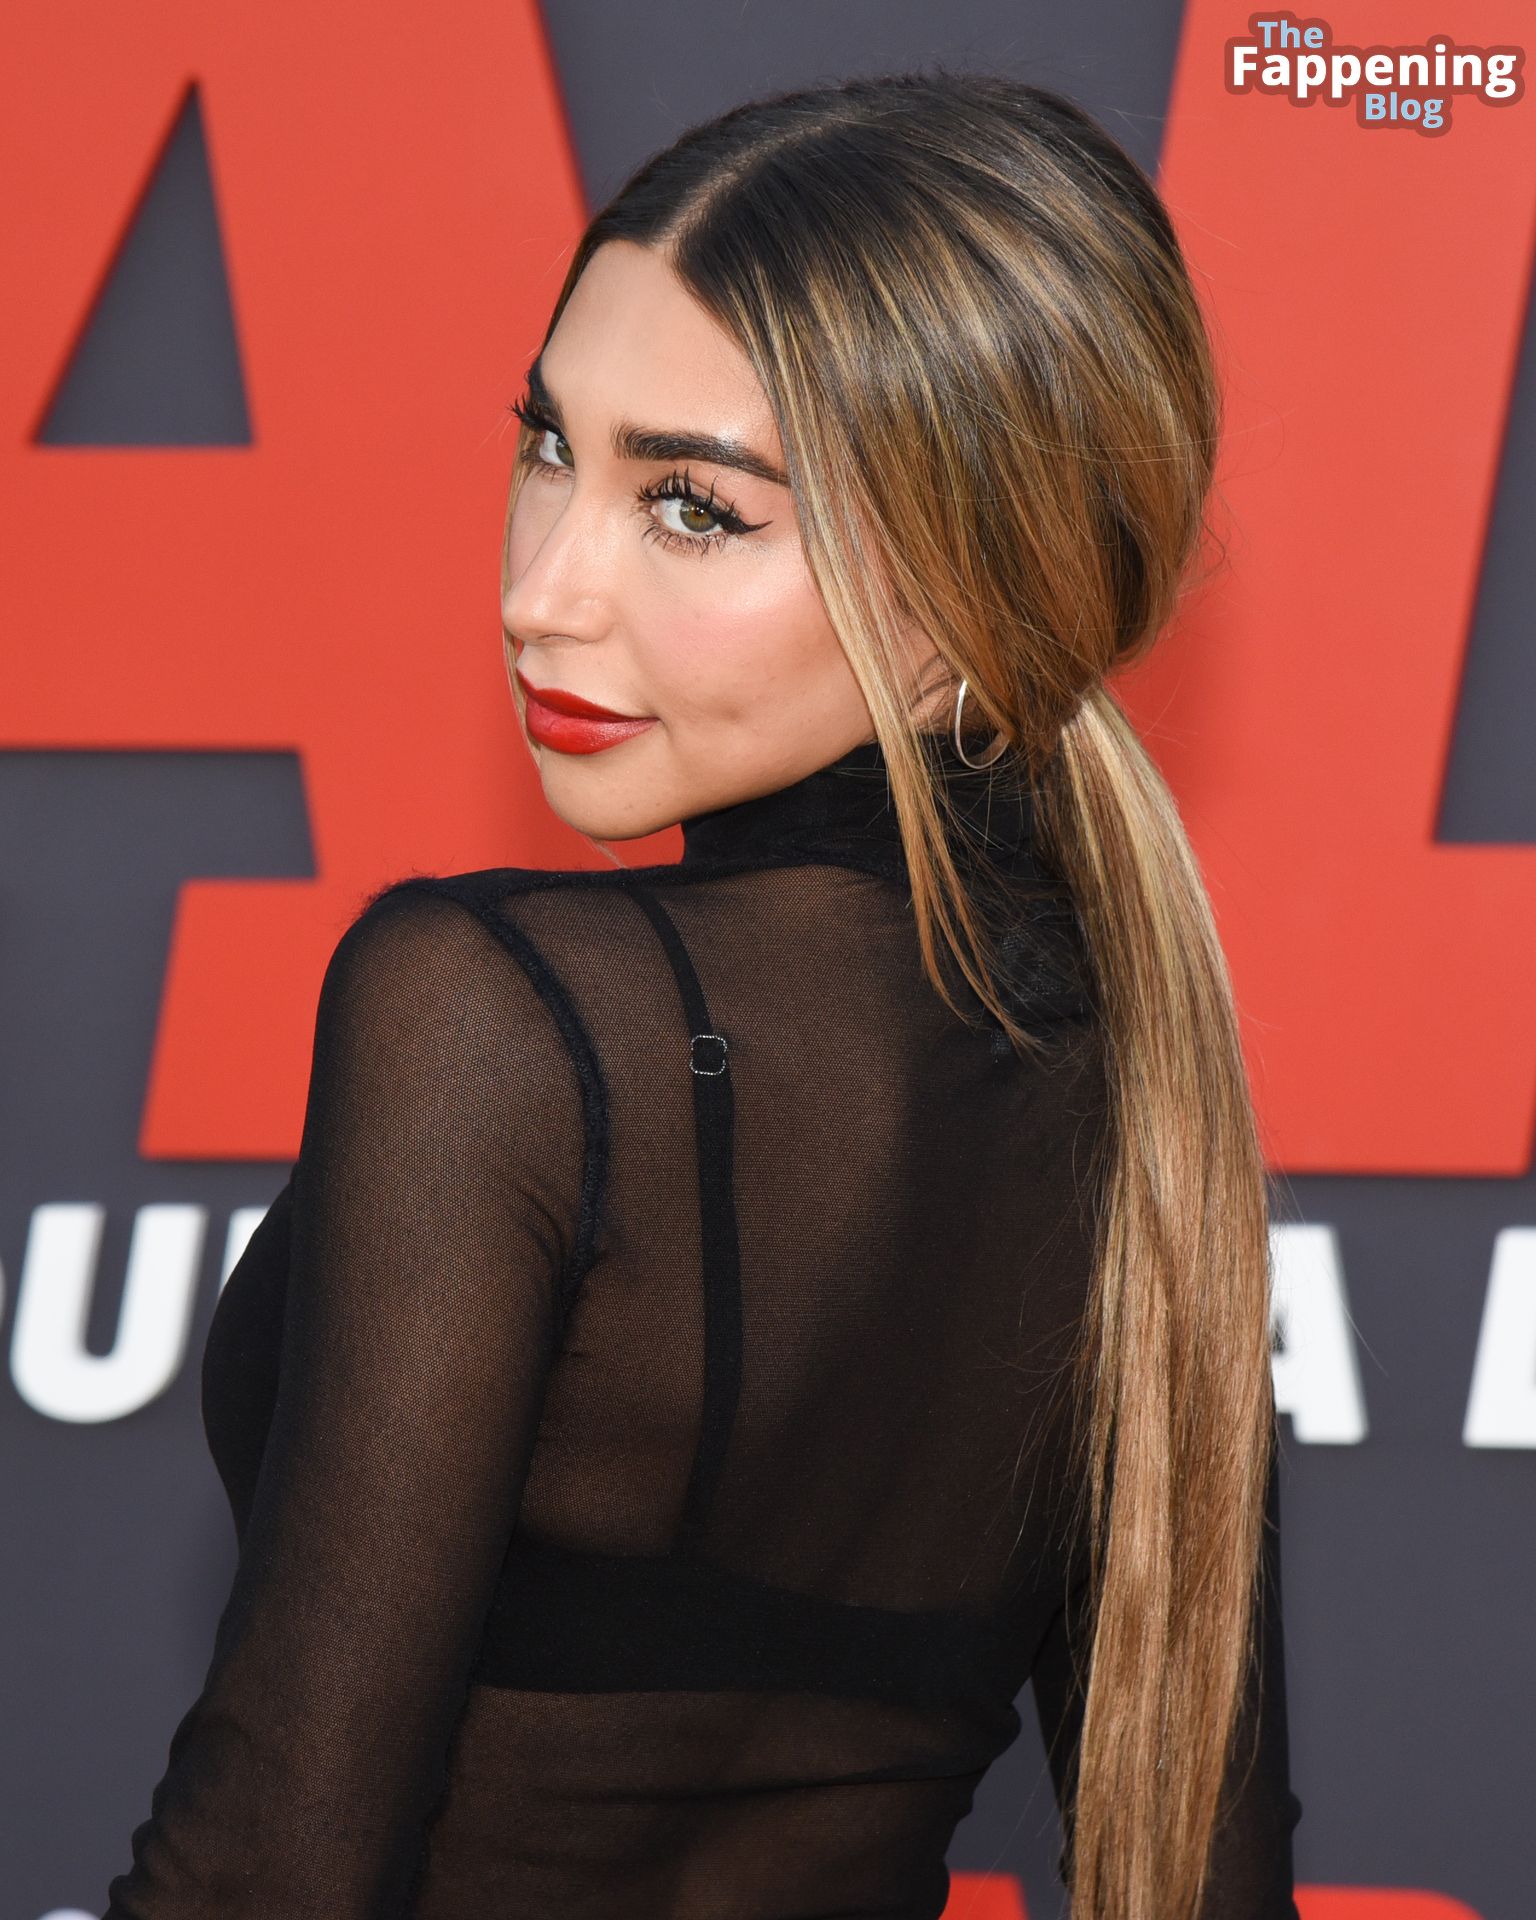 Chantel Jeffries Displays Her Beautiful Figure in a See-Through Dress at the “AIR” Premiere in LA (46 Photos)